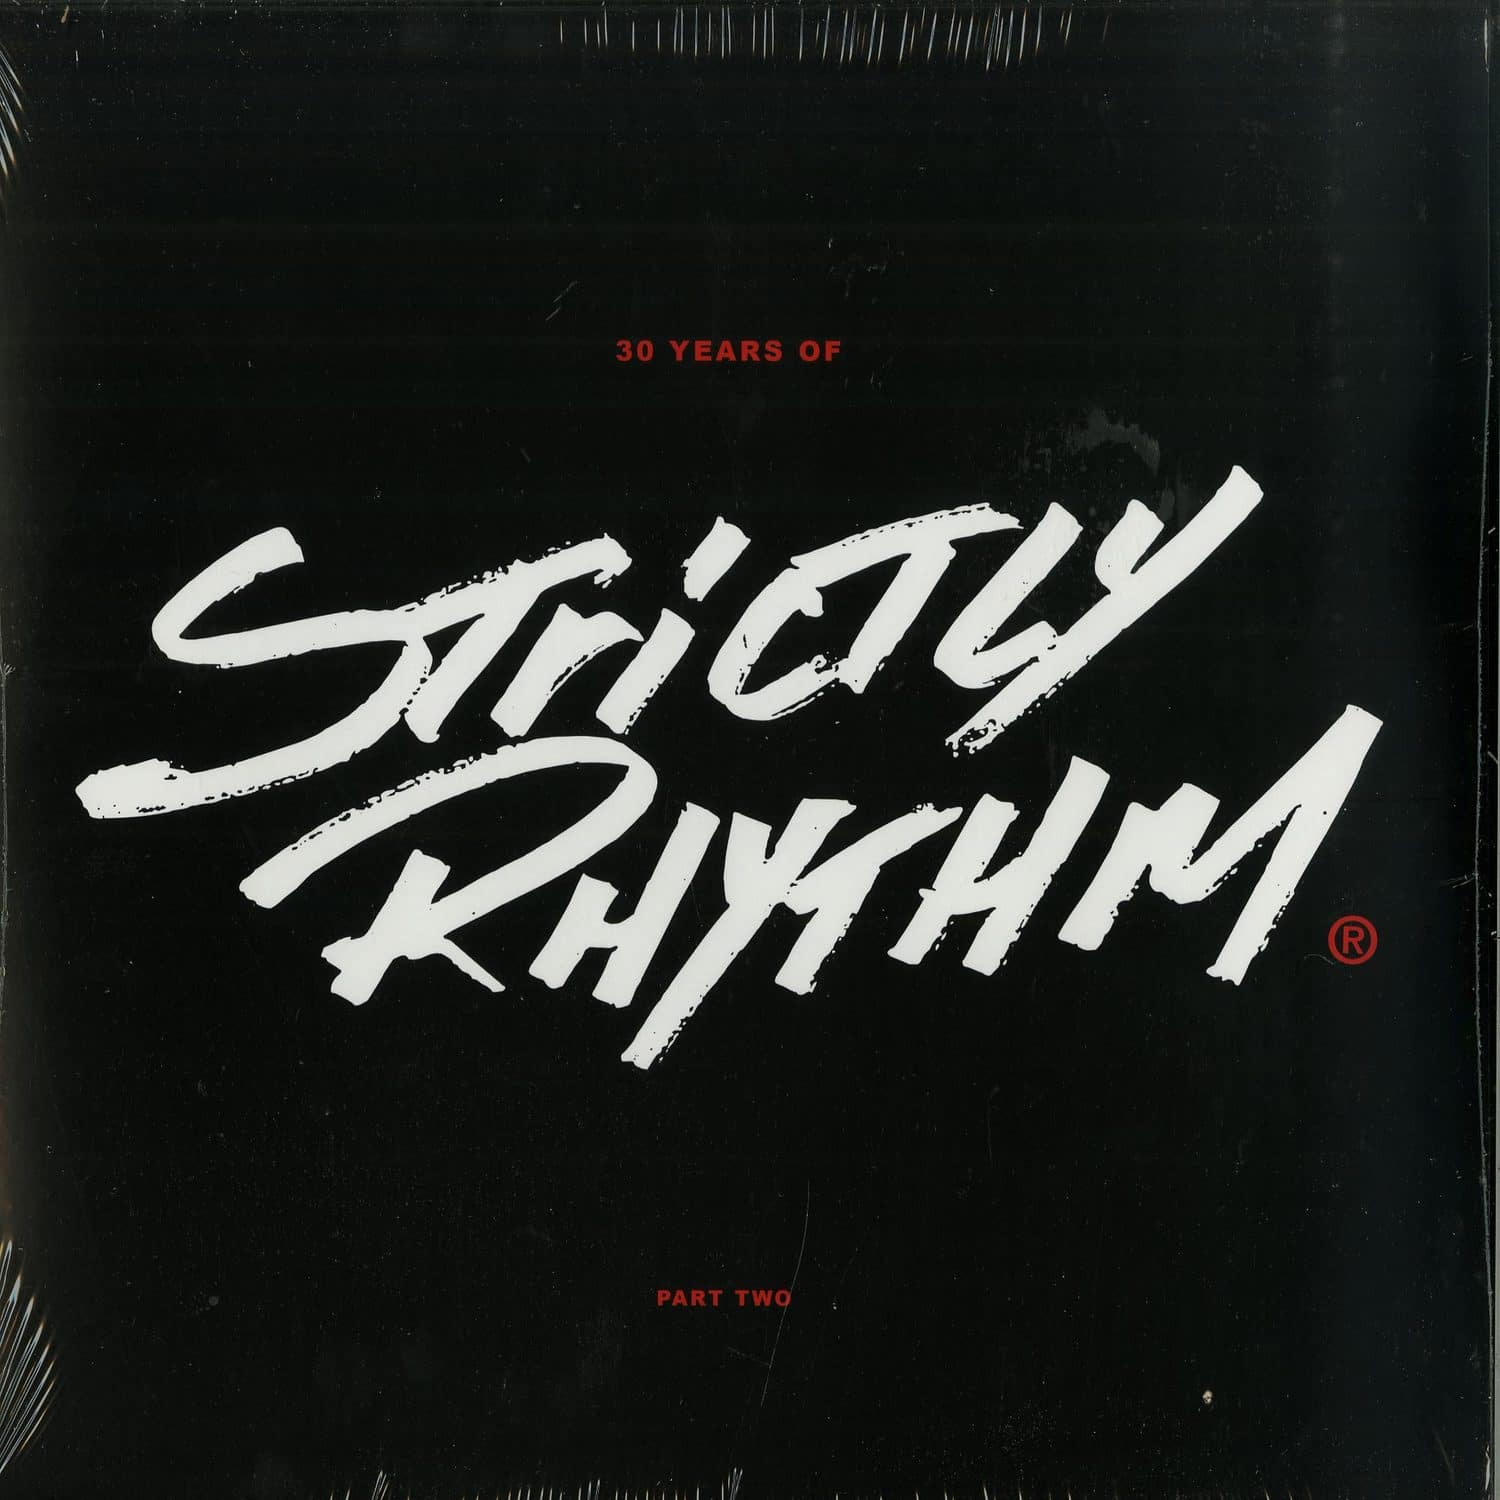 Mole People / DJ Sneak / Wamdue Project / Sole Fusion / Various Artists - 30 YEARS OF STRICTLY RHYTHM PART TWO 